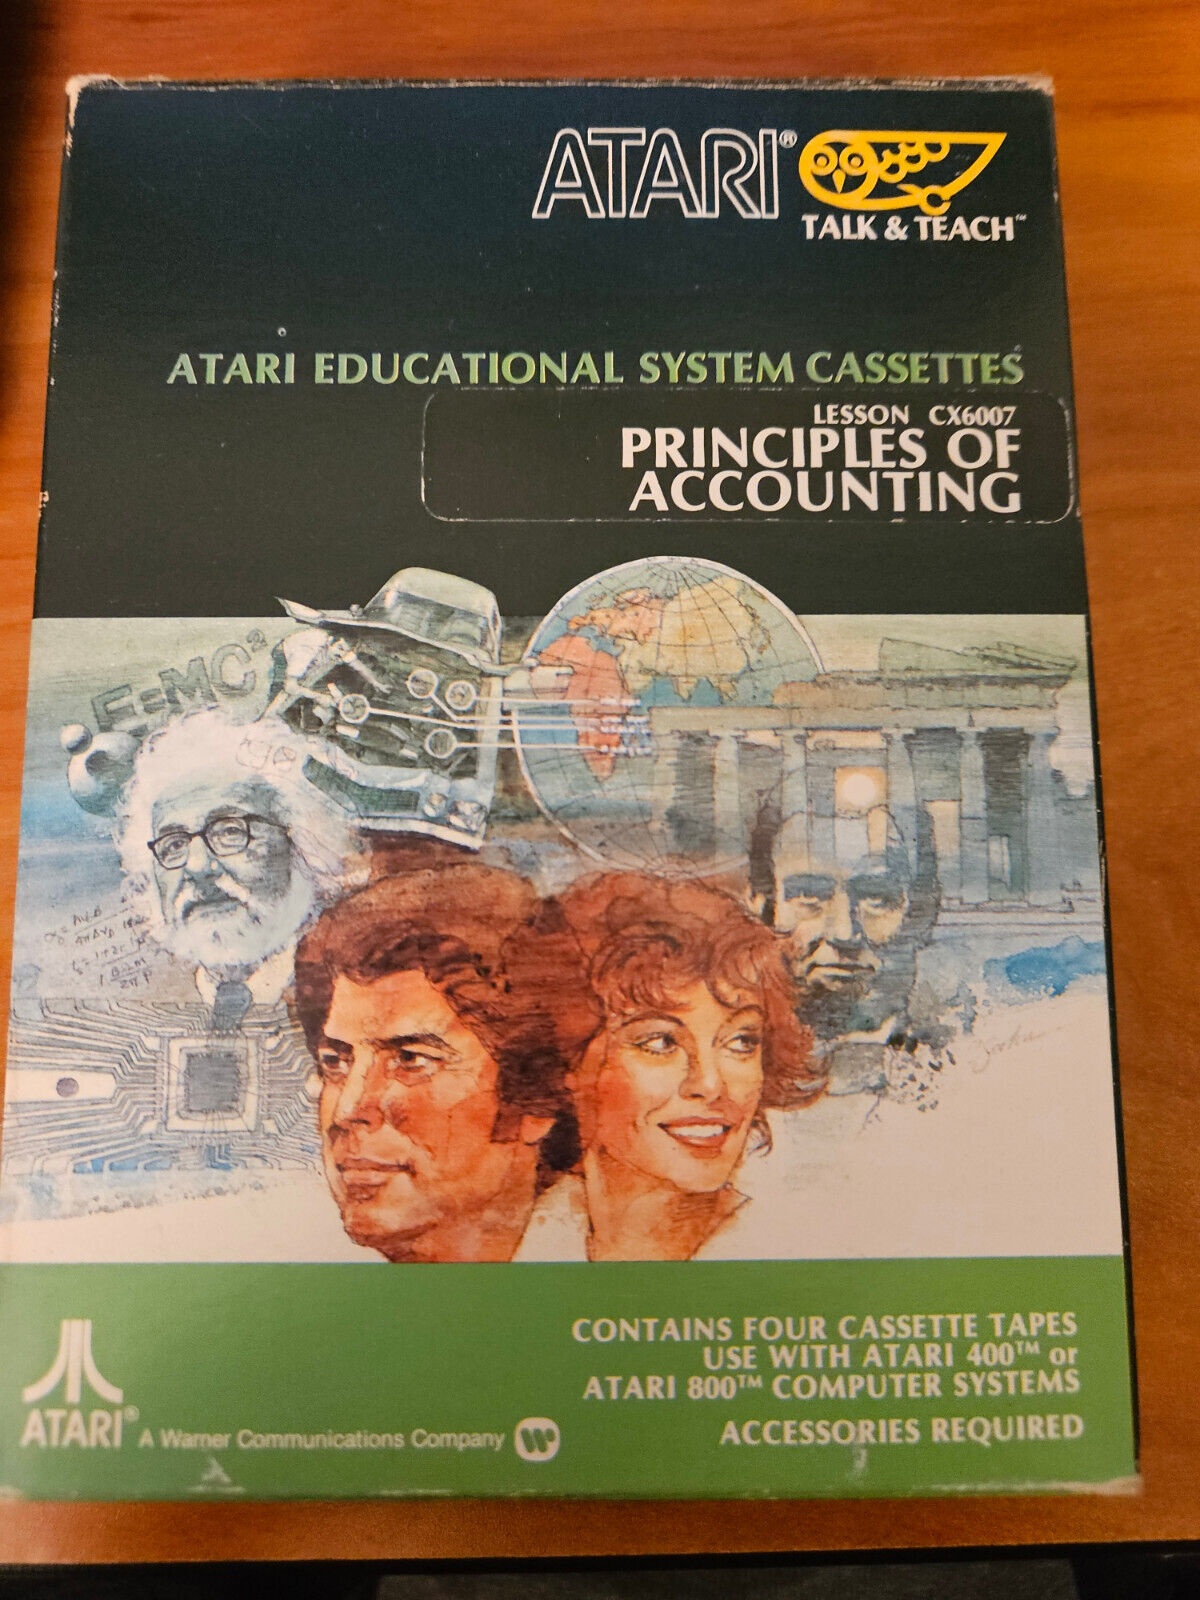 Atari 400 / 800 Educational System Cassettes - Principles of Accounting CX6007